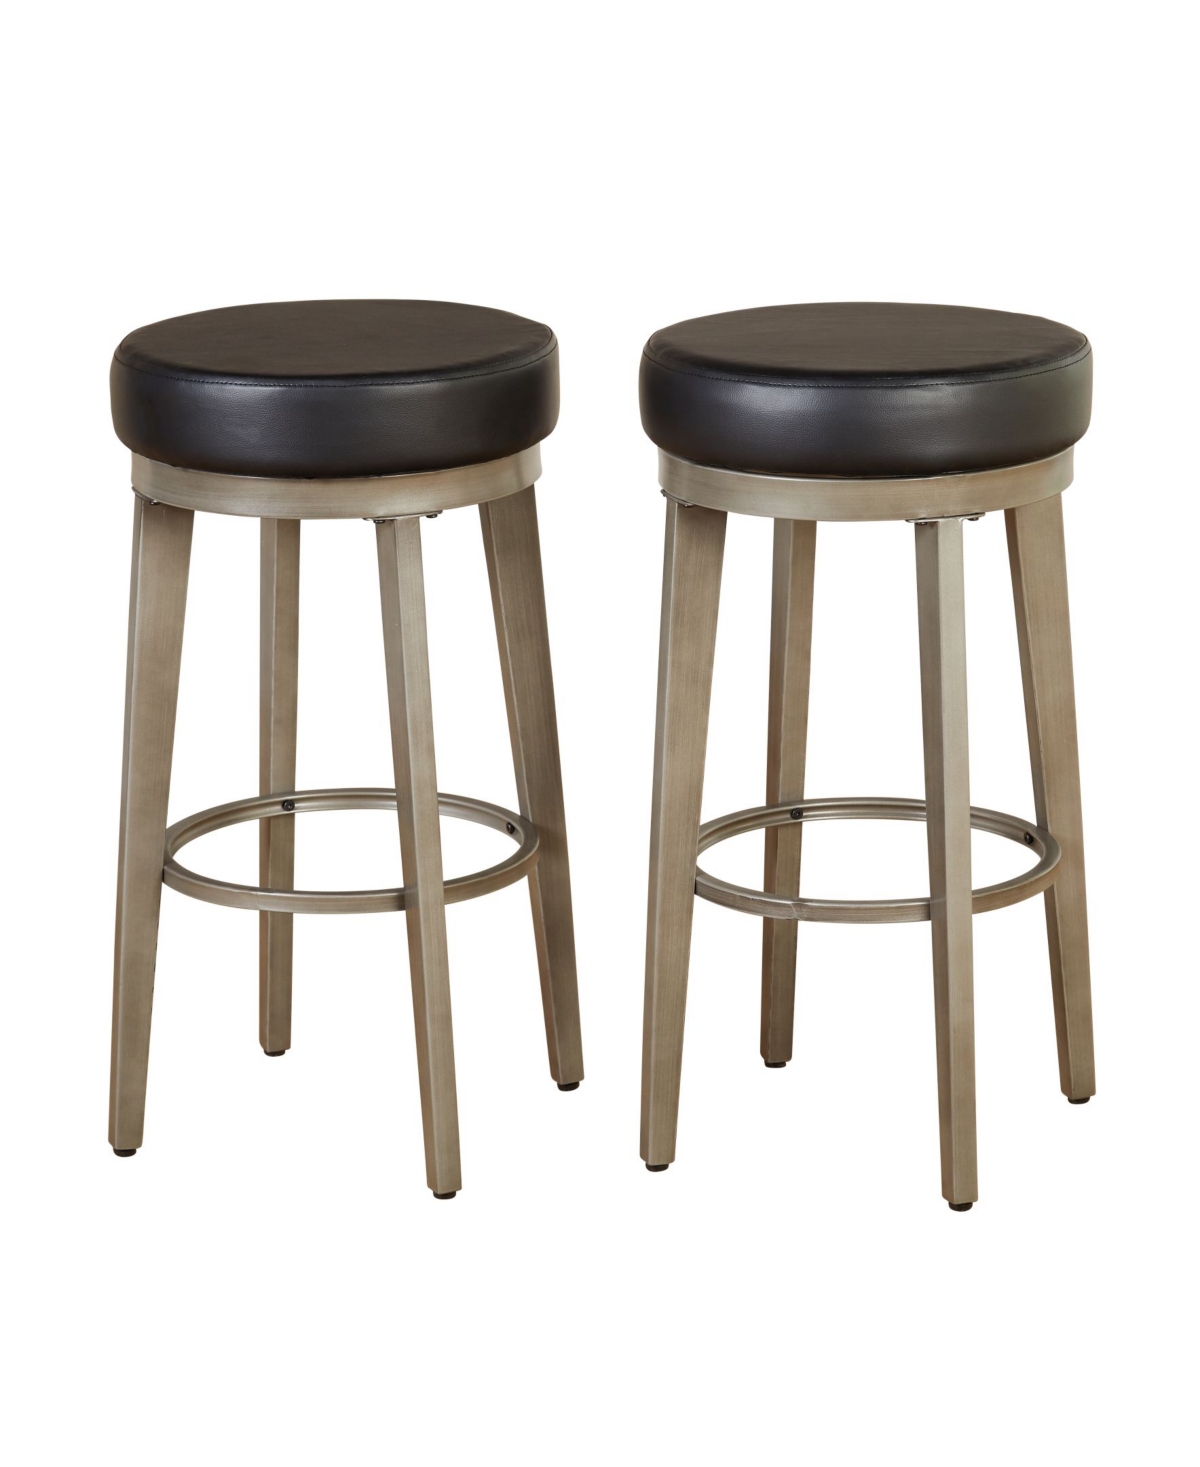 Buylateral Angelo Home Linden Leather Swivel Stool Set of 2